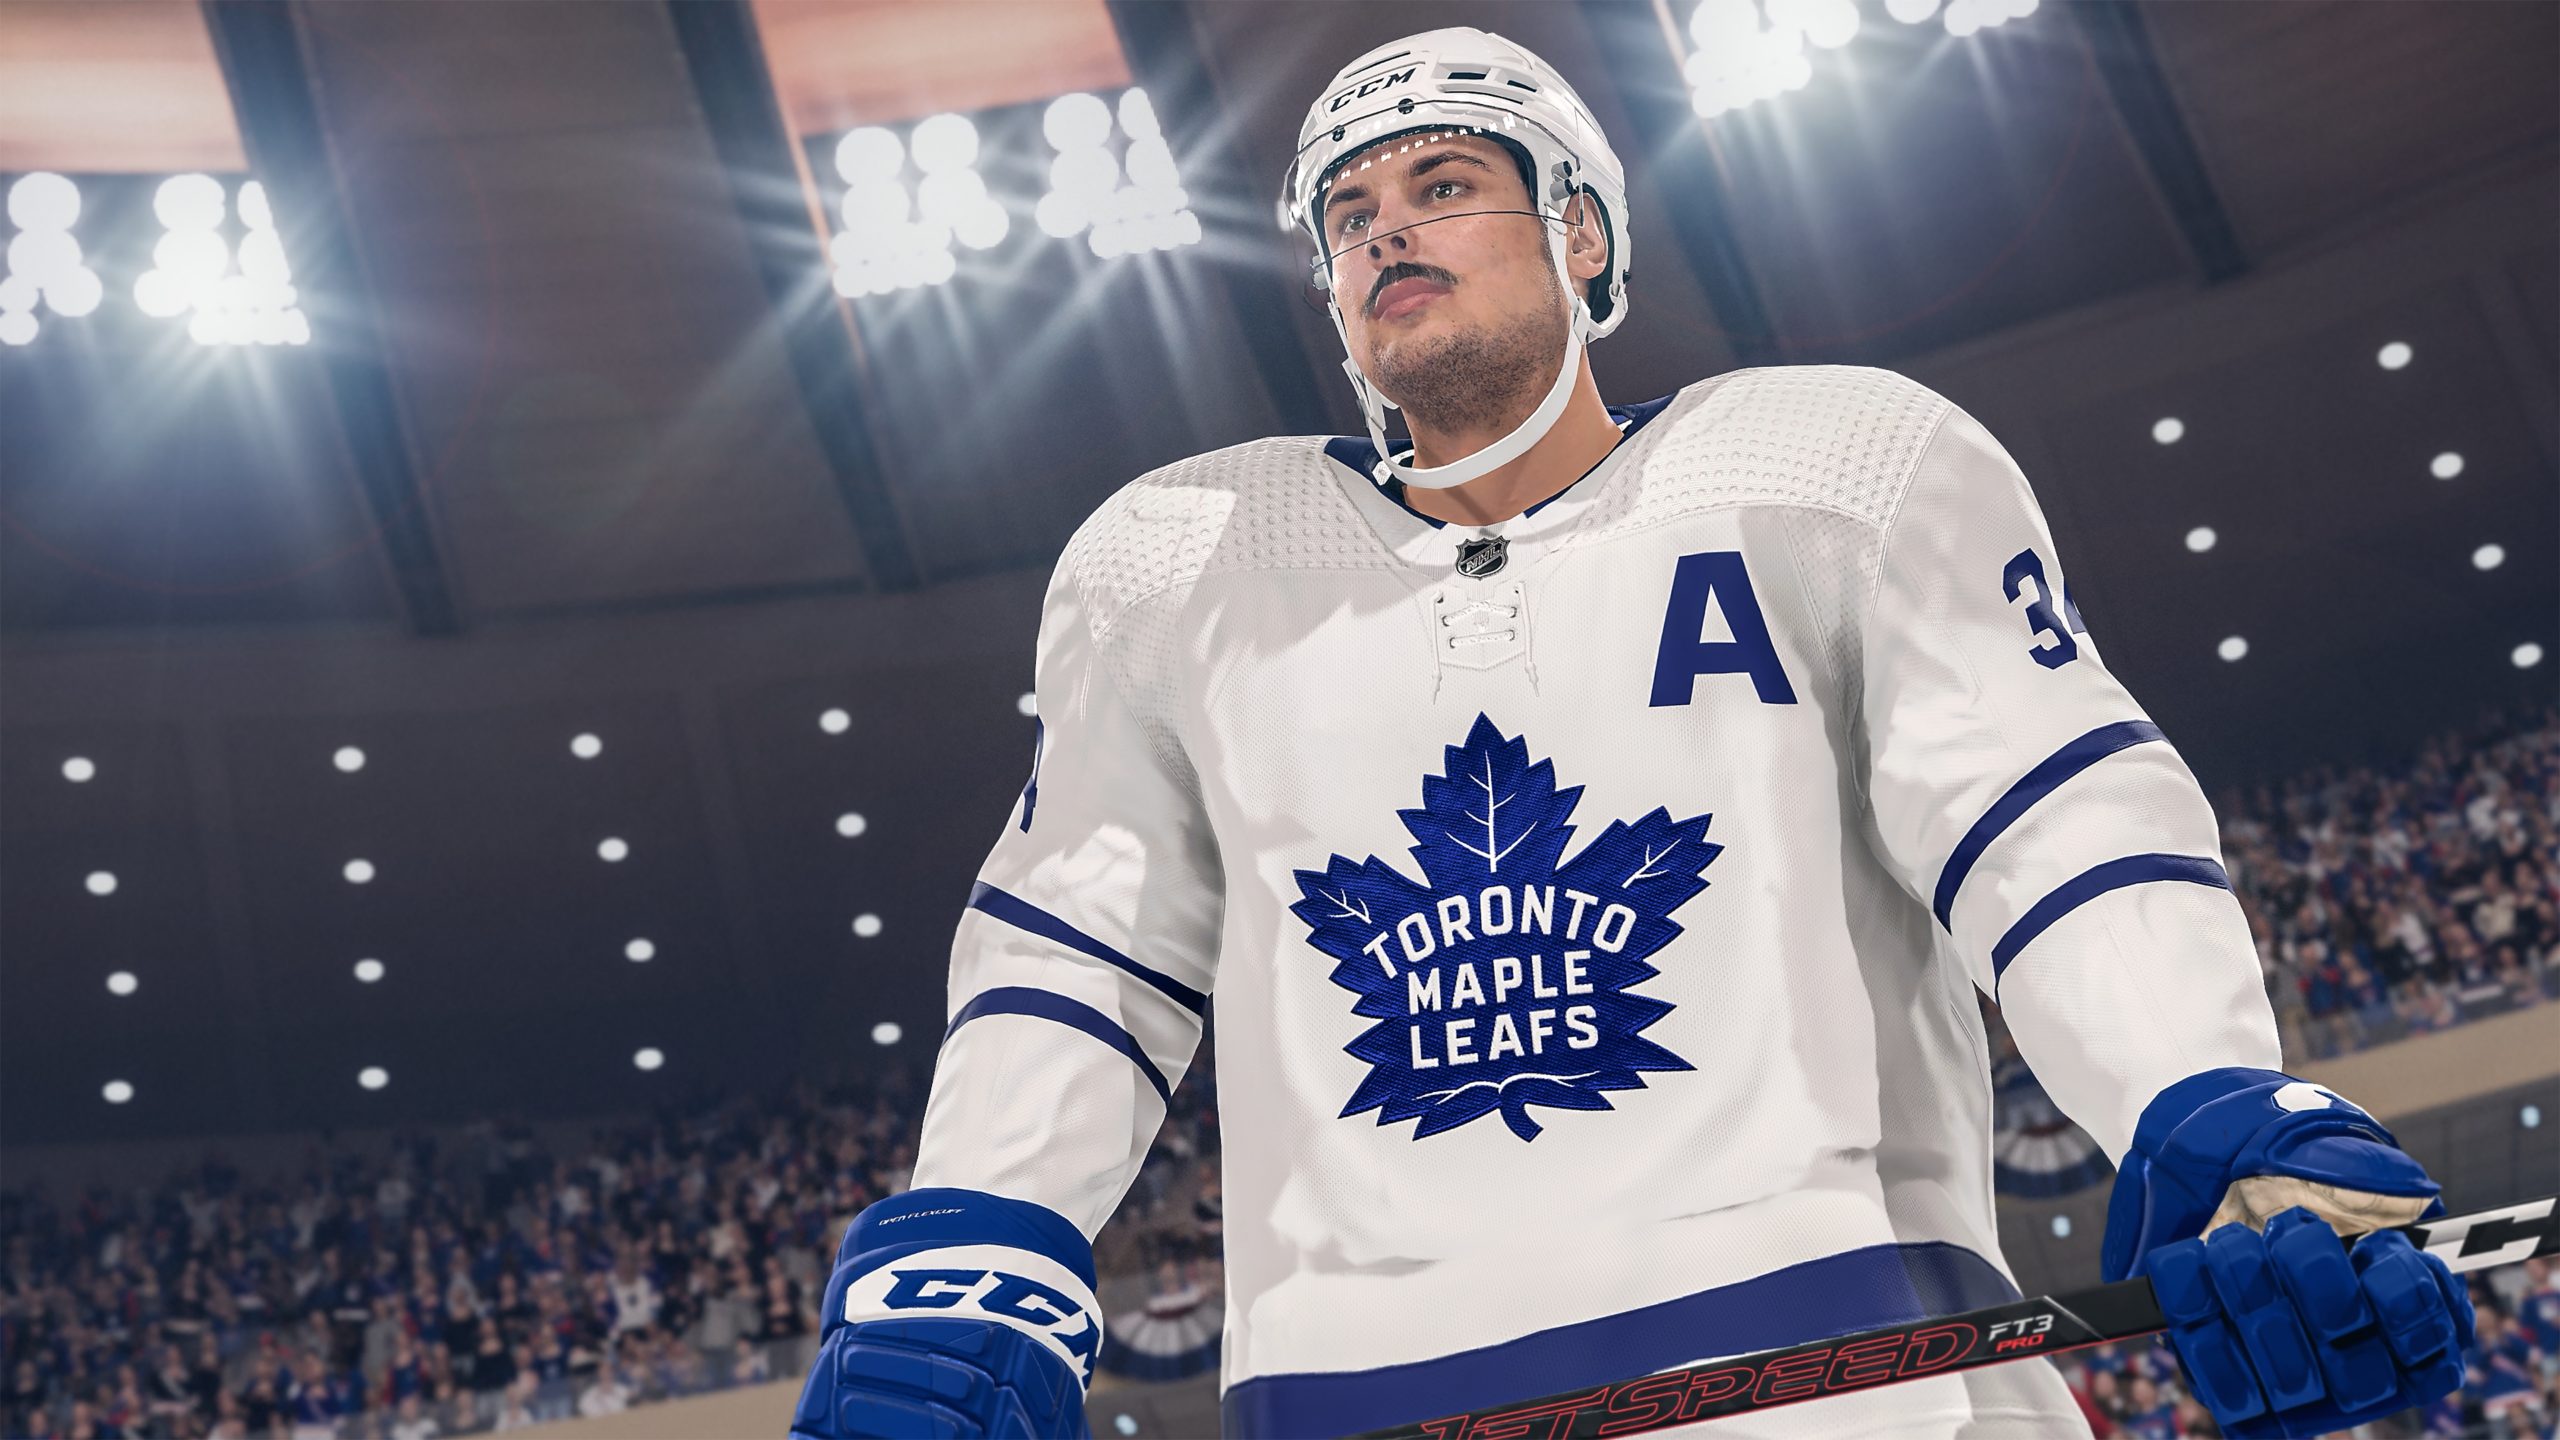 NHL 23 Cover Reveal. Who Is the Cover Athlete in NHL 23?